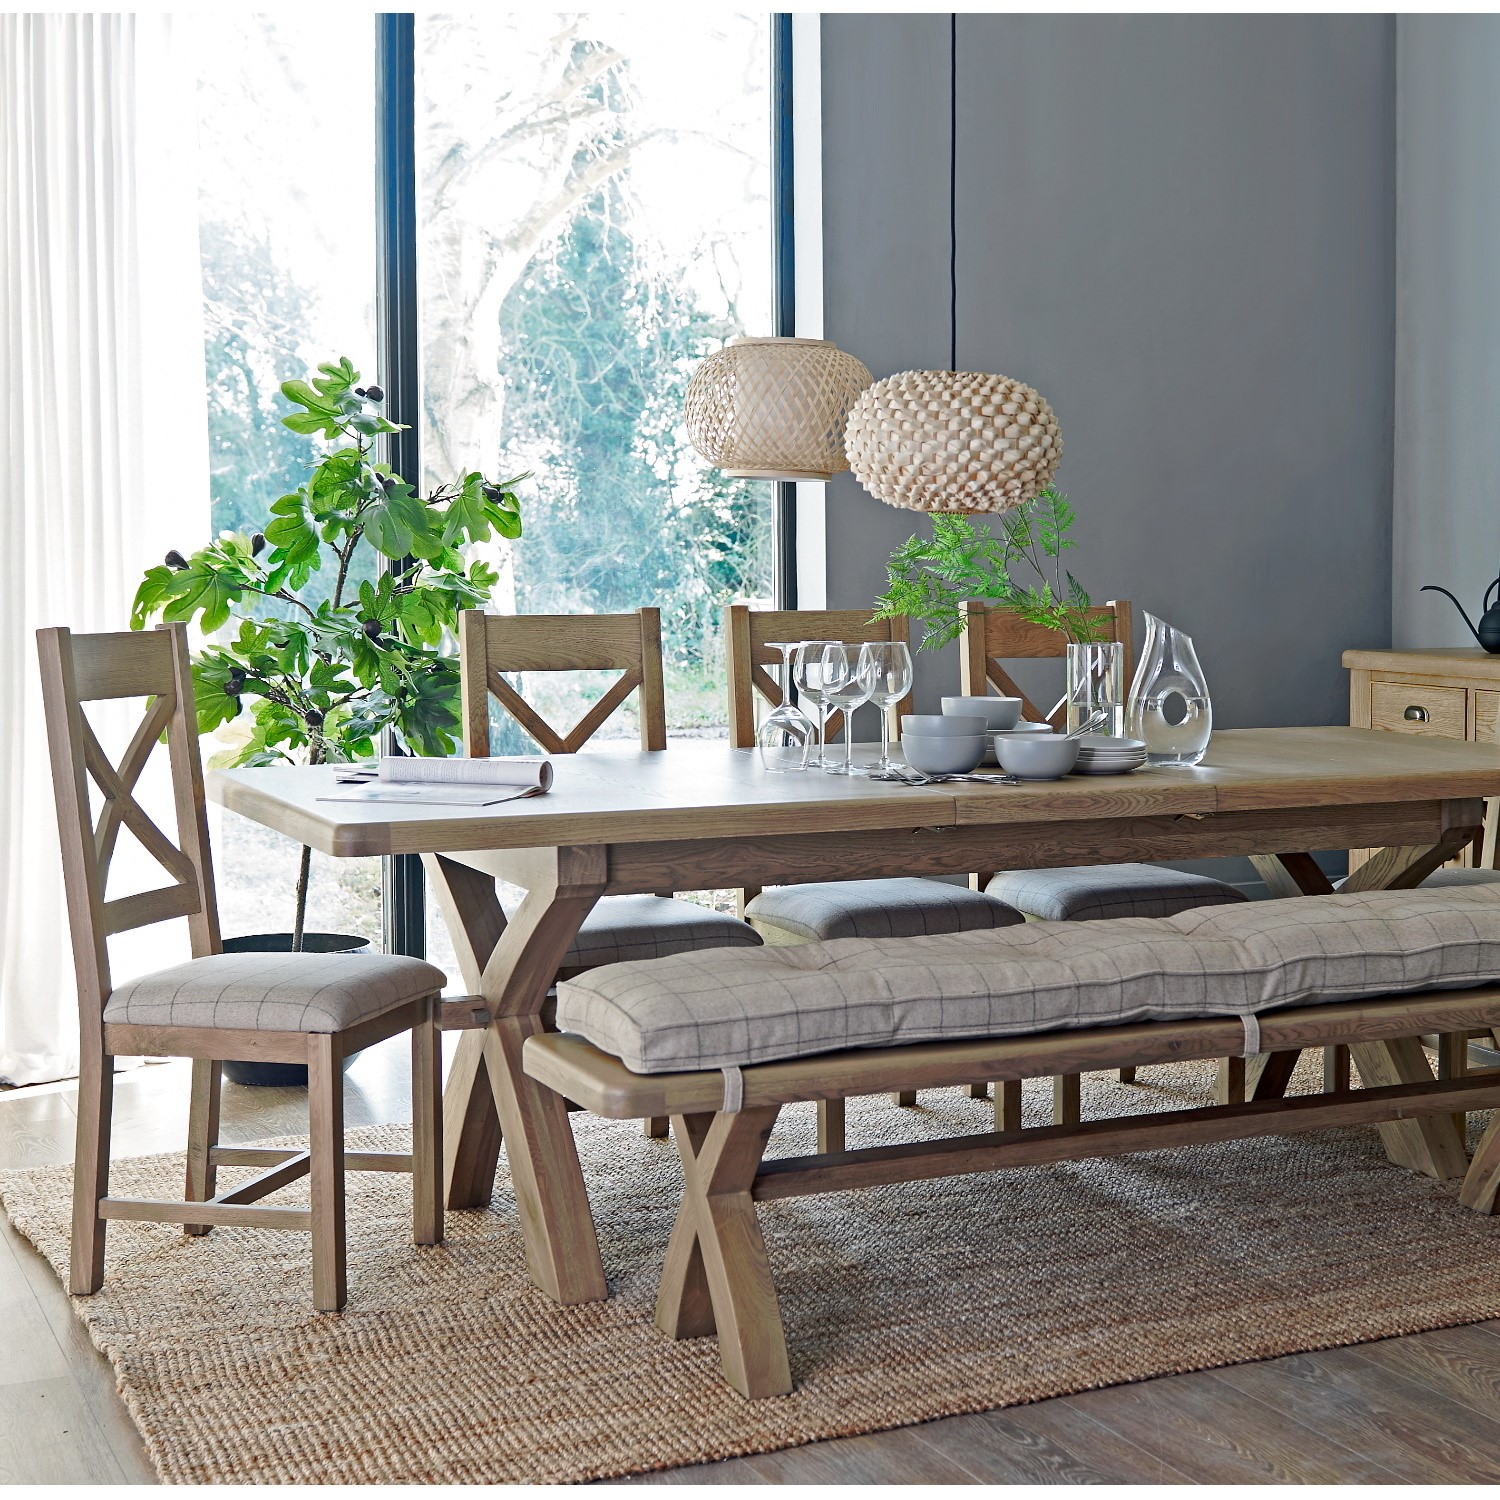 Oak 8 Seater Extendable Dining Table, Dining Room Table With Bench Seats 8